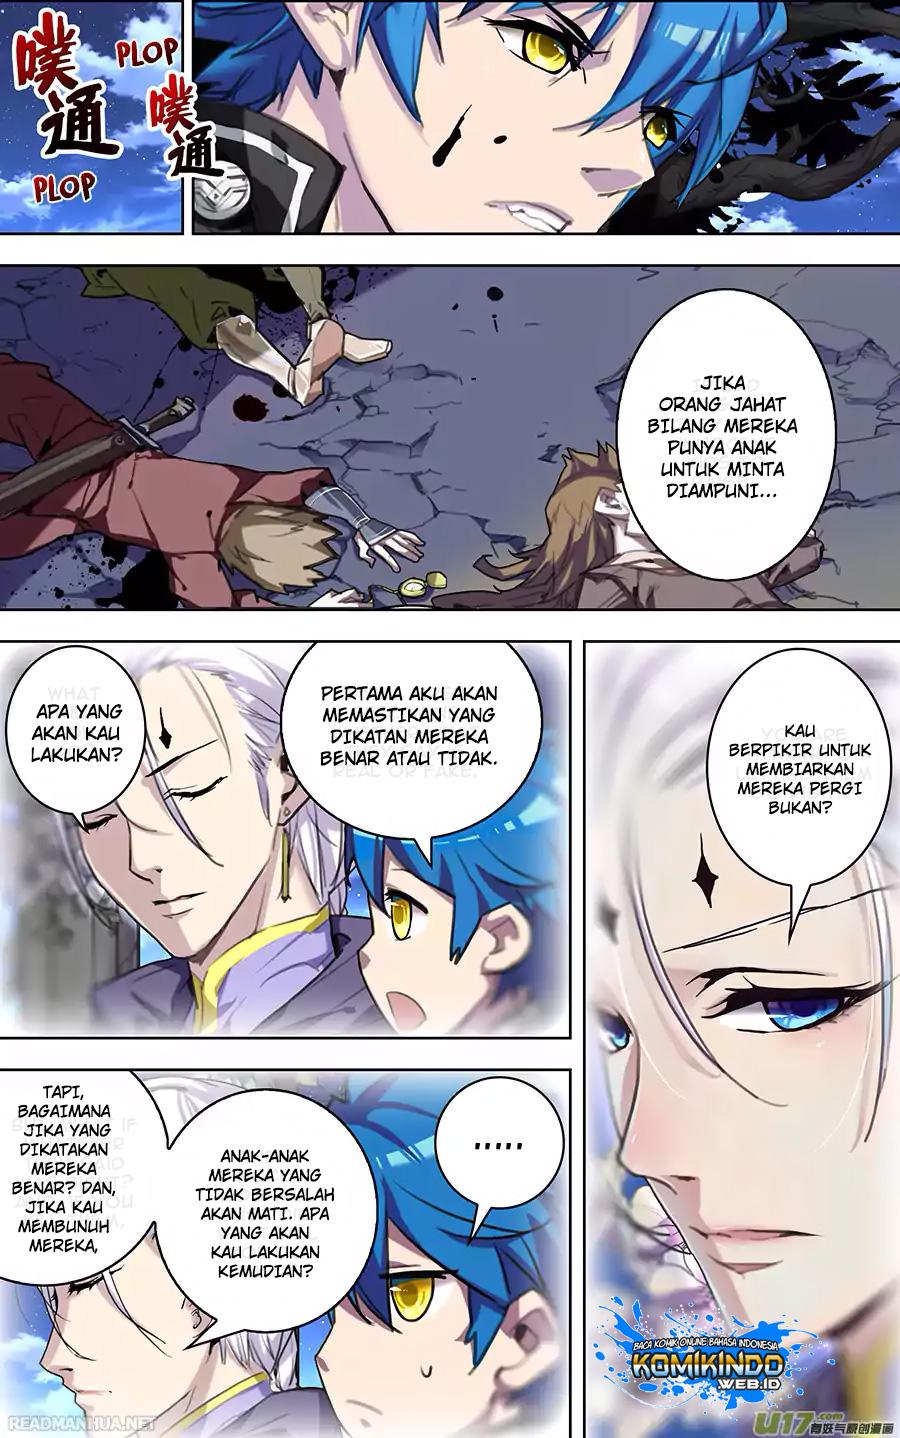 Lord Xue Ying Chapter 10-2